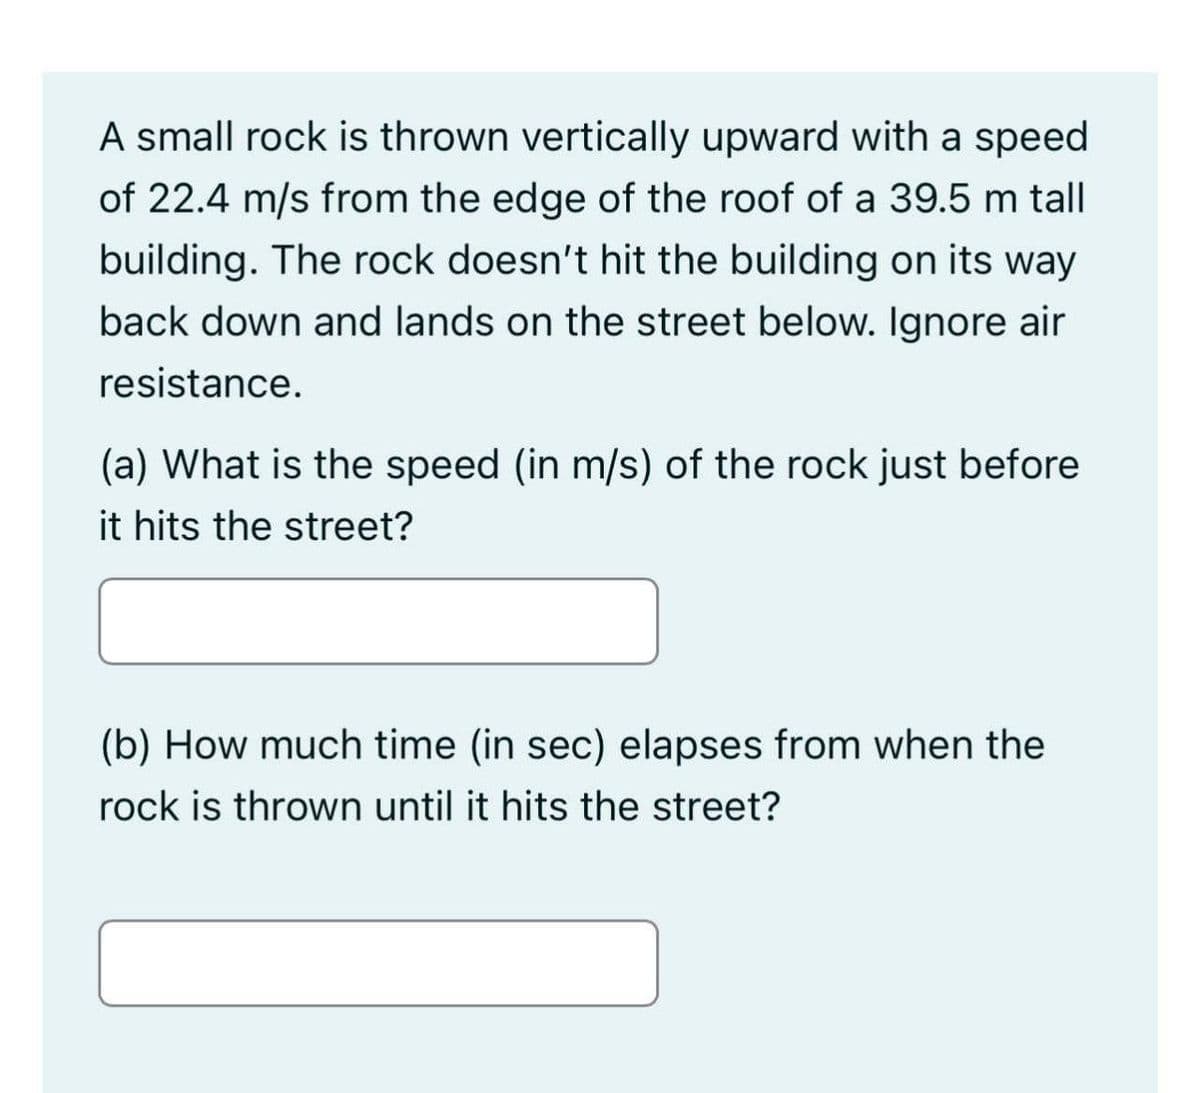 A small rock is thrown vertically upward with a speed
of 22.4 m/s from the edge of the roof of a 39.5 m tall
building. The rock doesn't hit the building on its way
back down and lands on the street below. Ignore air
resistance.
(a) What is the speed (in m/s) of the rock just before
it hits the street?
(b) How much time (in sec) elapses from when the
rock is thrown until it hits the street?